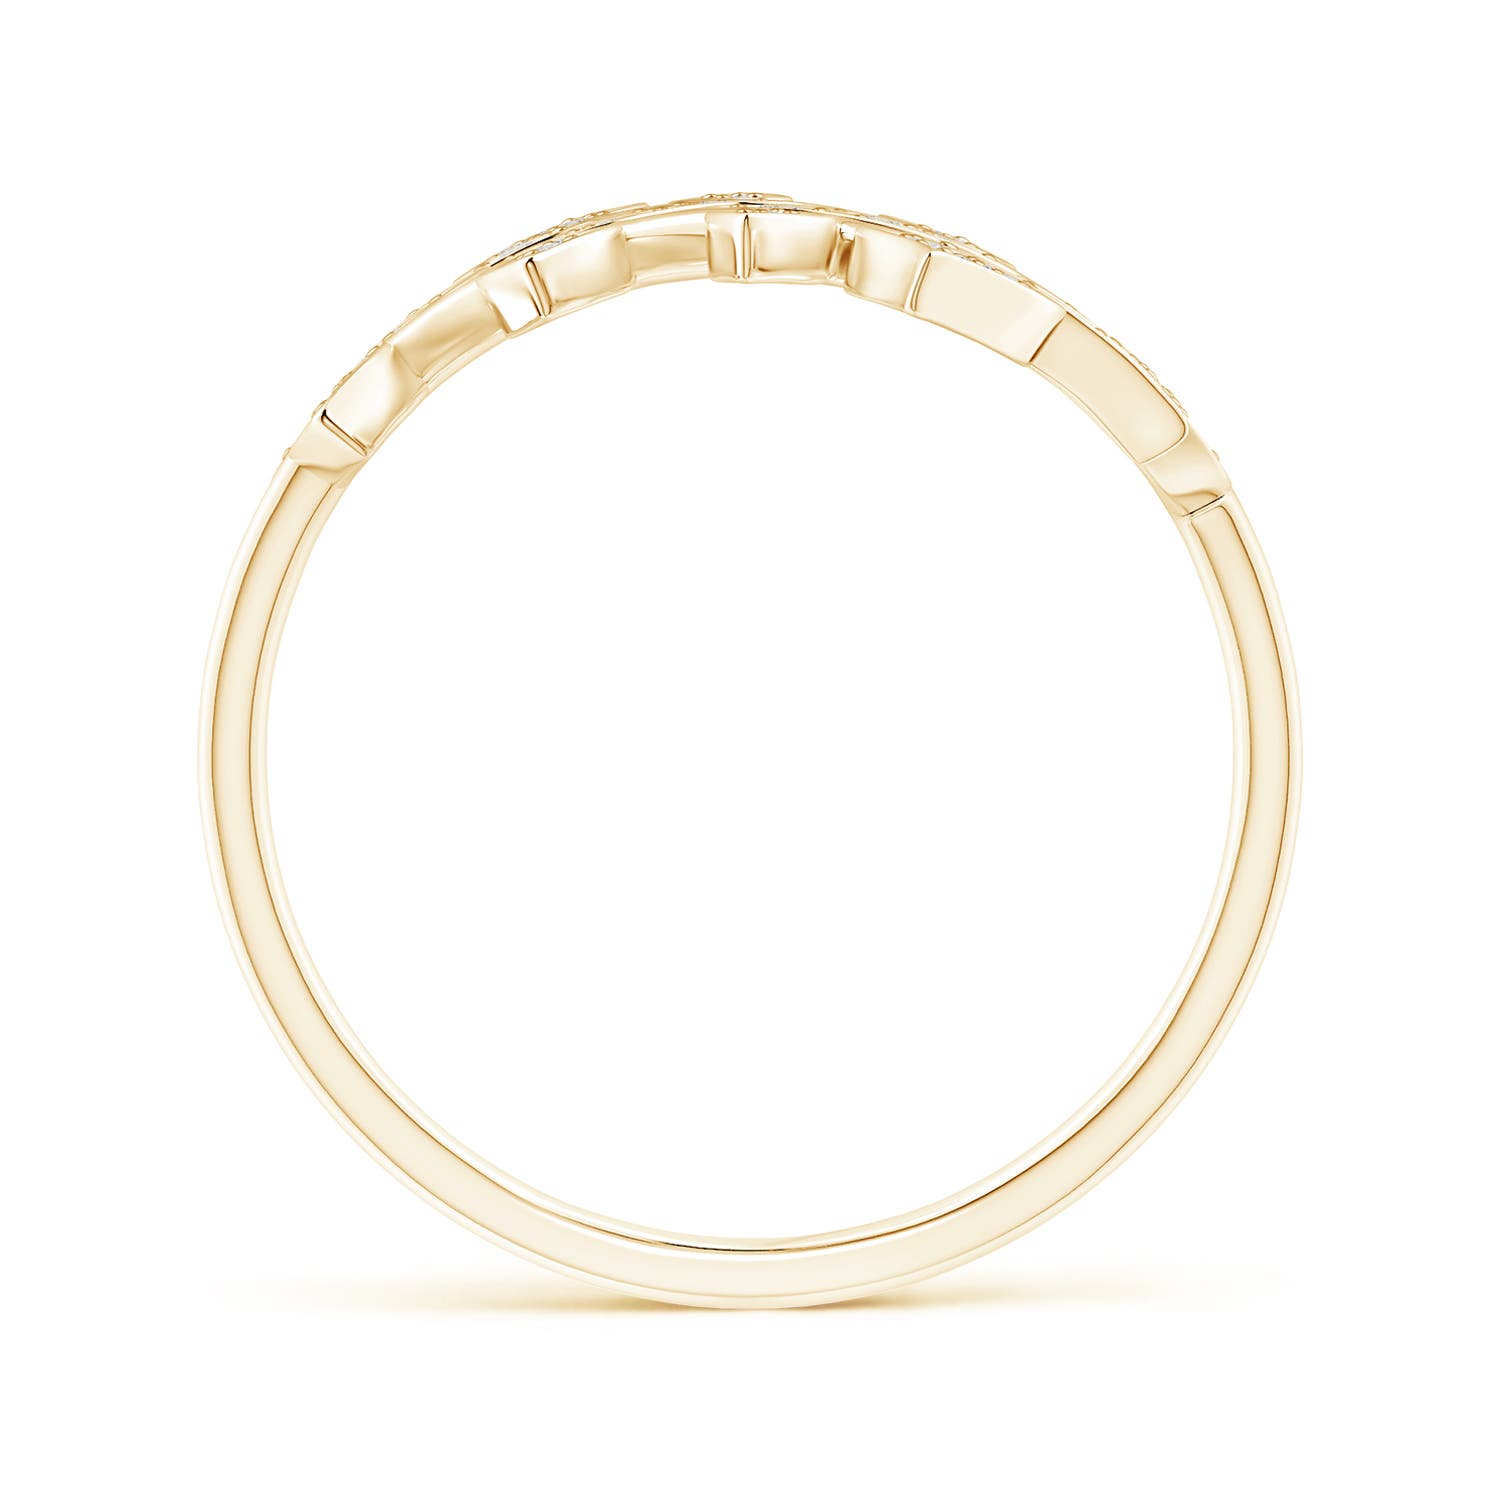 HSI2 / 0.36 CT / 14 KT Yellow Gold